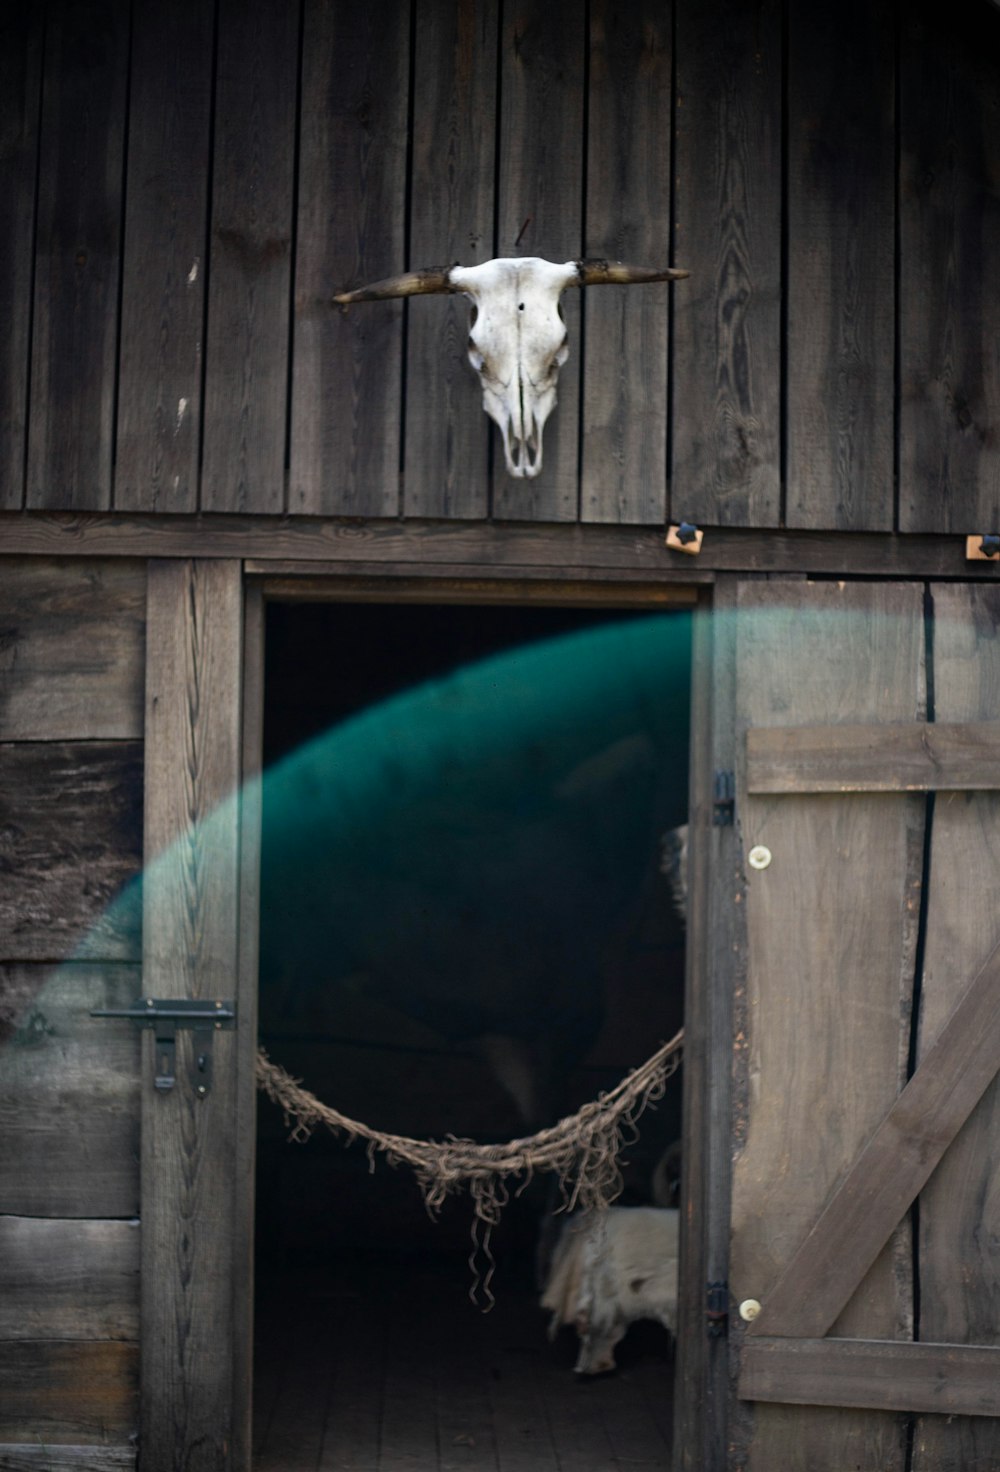 a goat in a barn